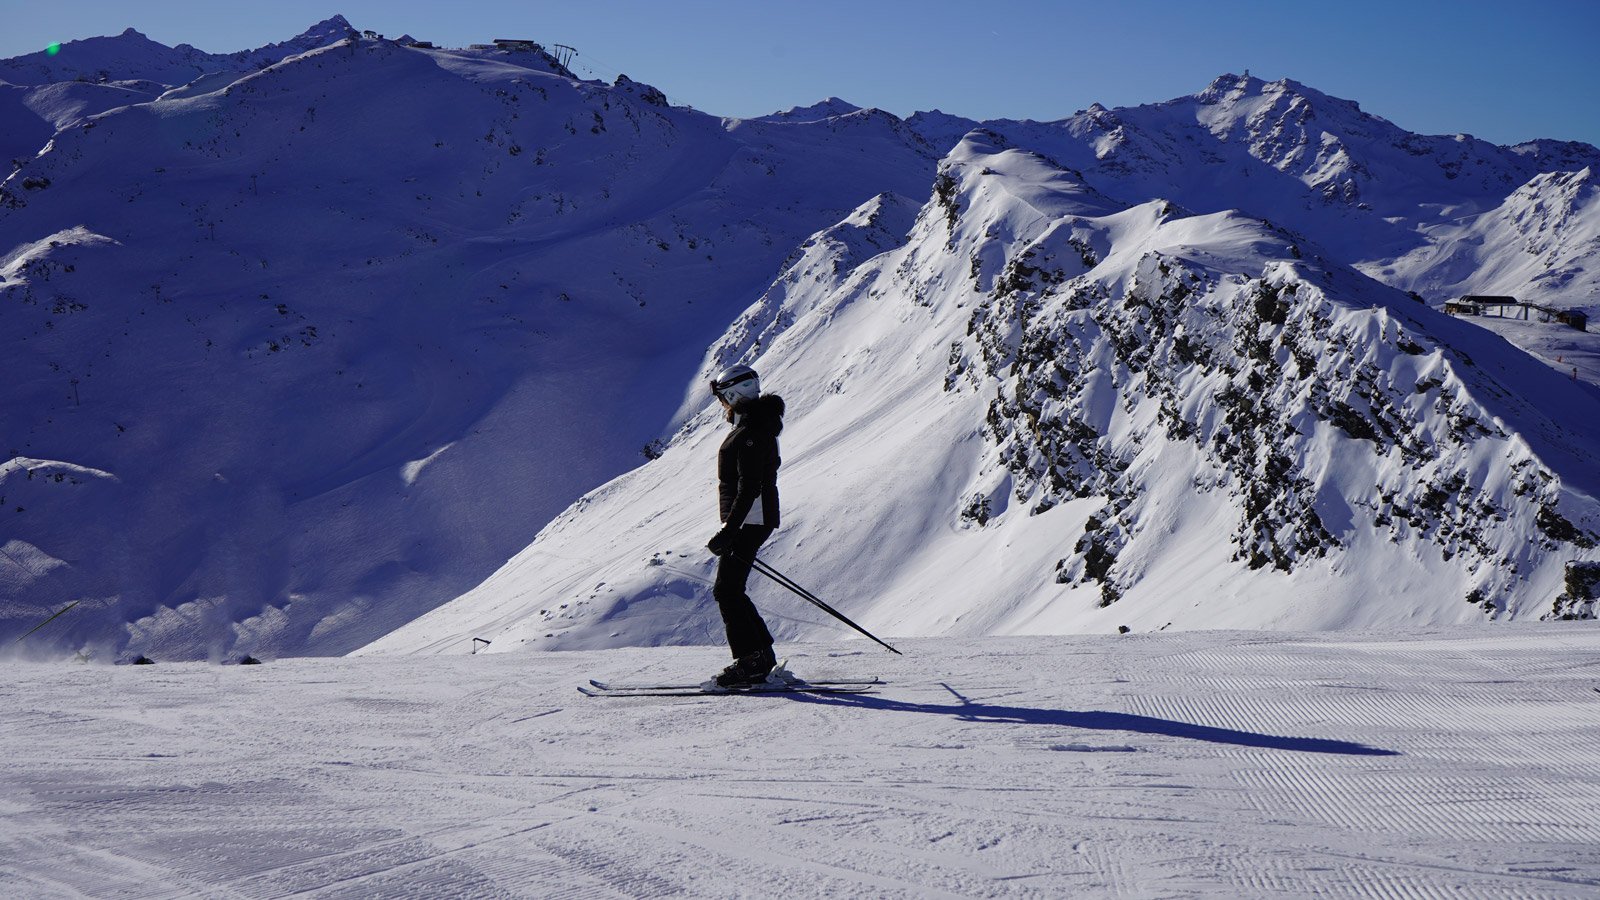 Skiing in 3 Valleys, Méribel The French Alps